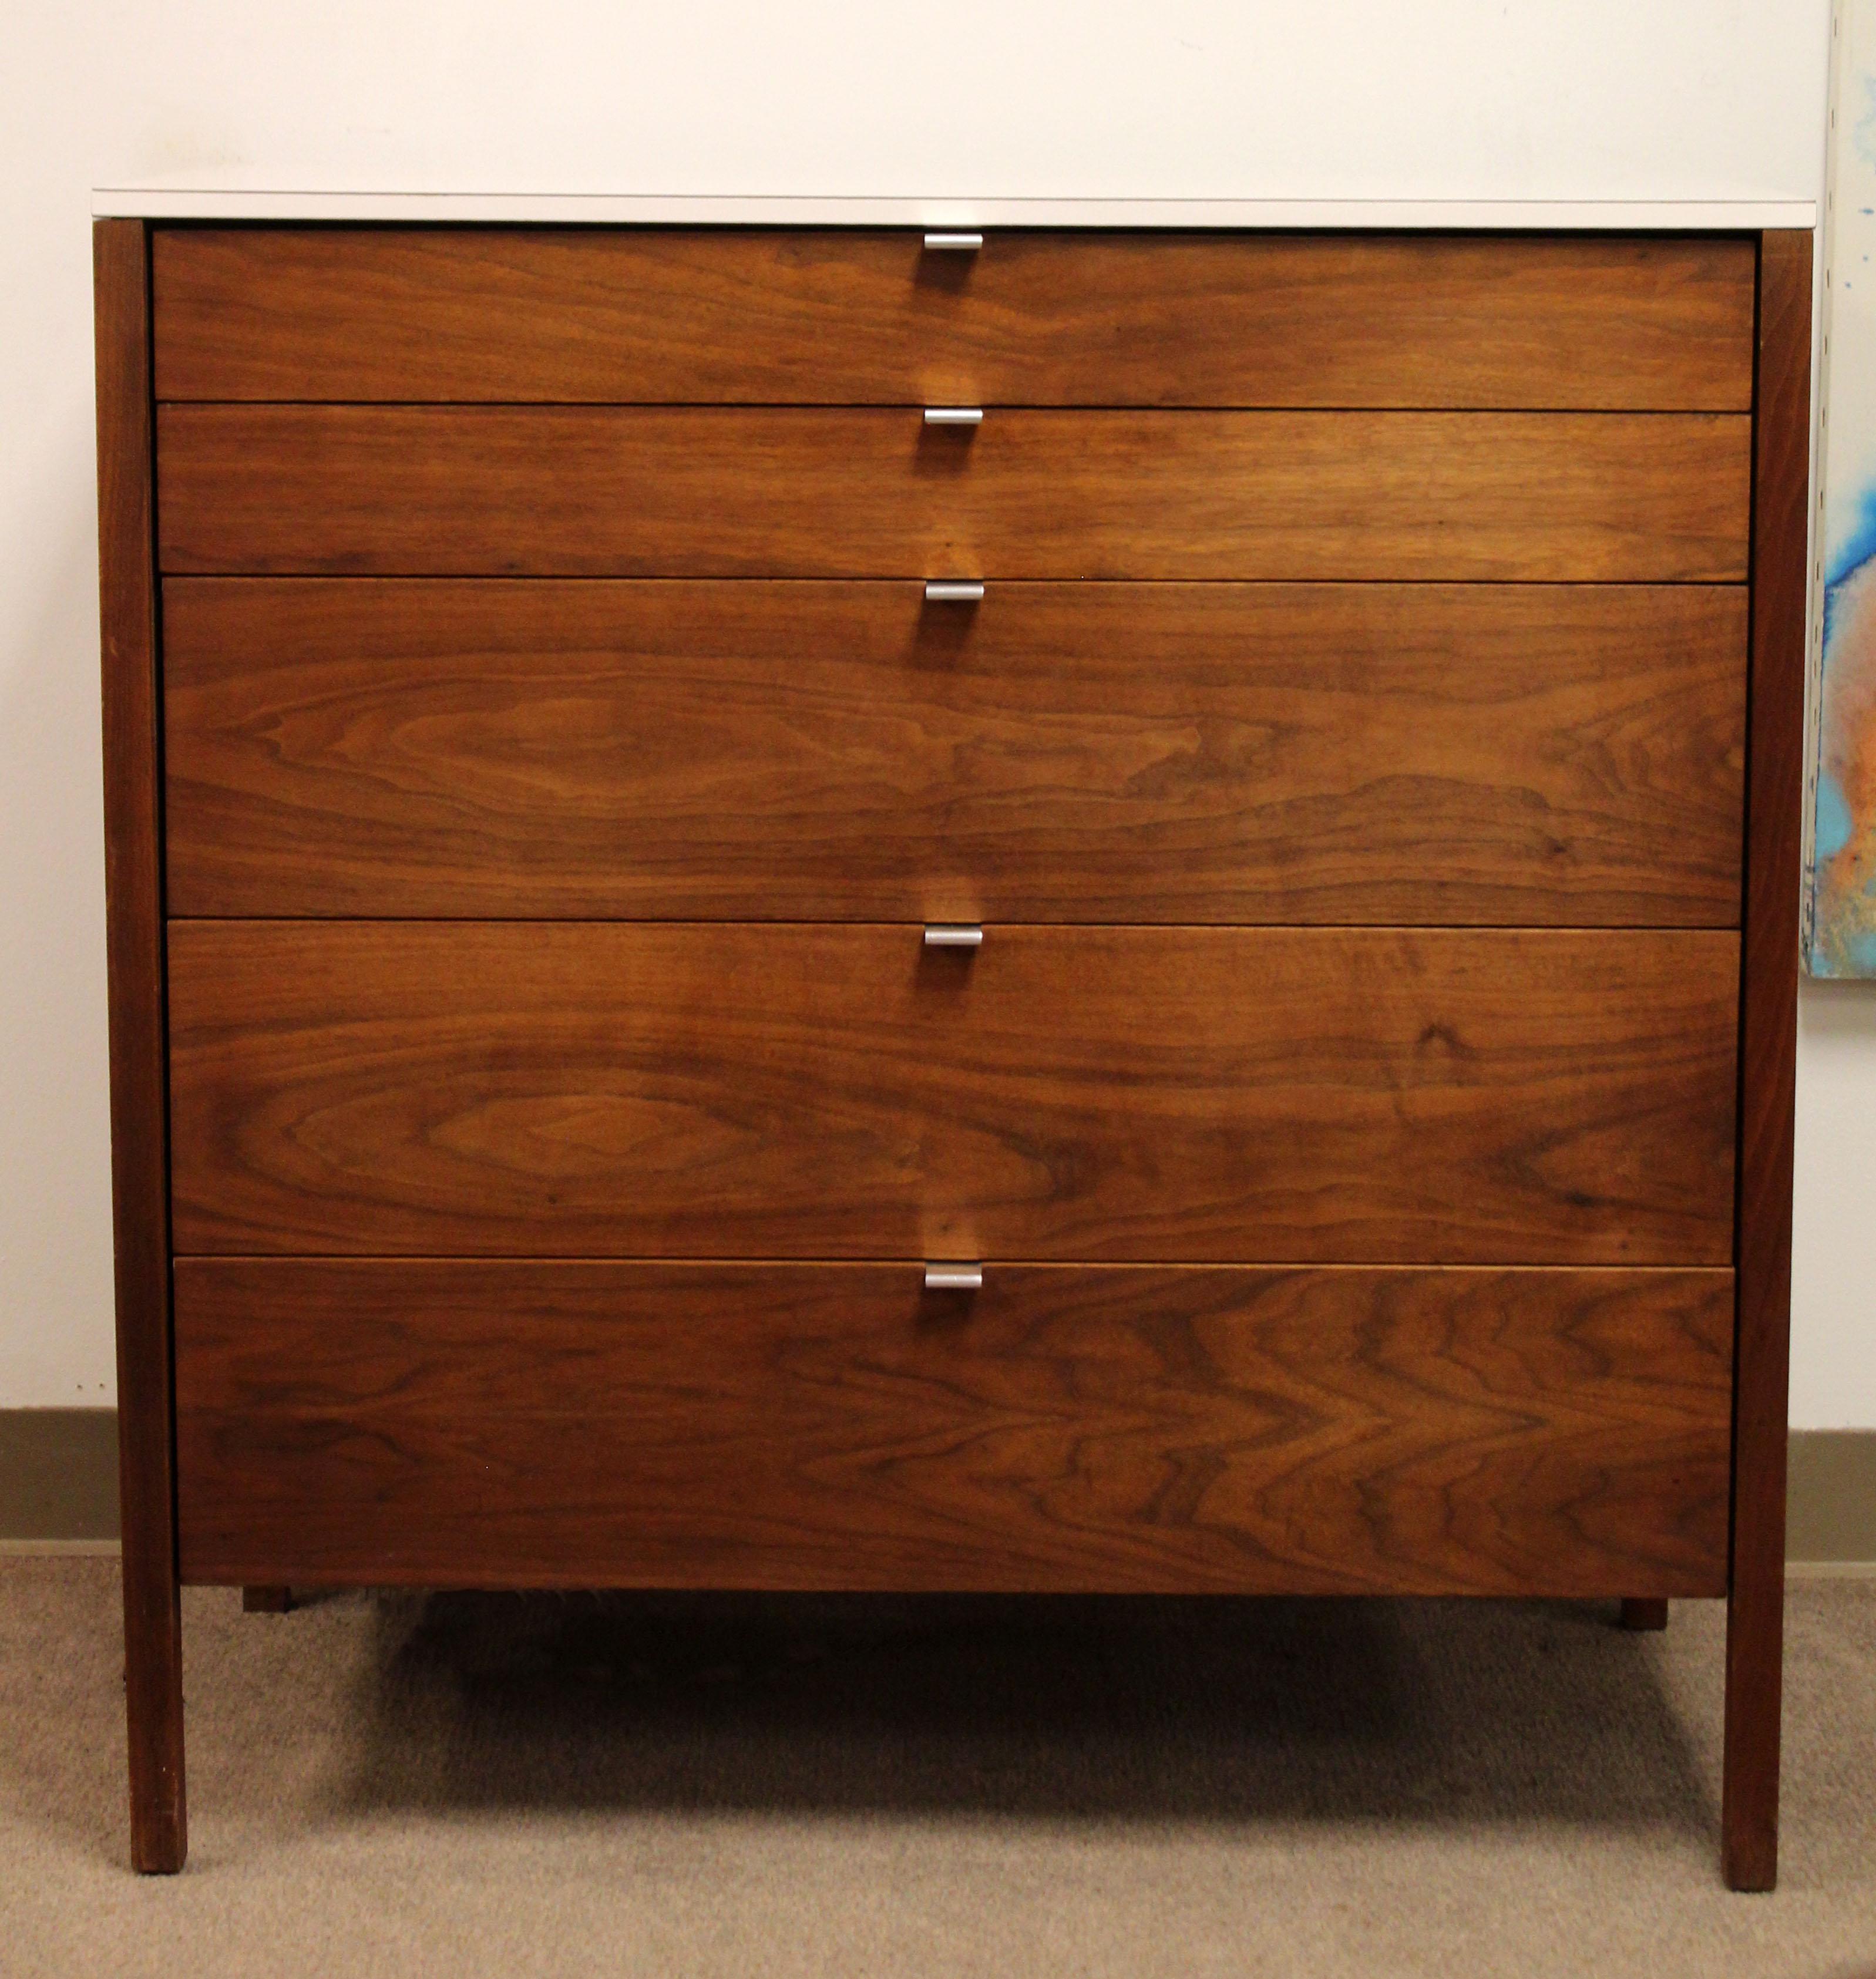 For your consideration is a marvelous, five-drawer dresser, made of wood, with chrome pulls and a laminate top, by Florence Knoll, circa the 1960s. In excellent condition. Has the original Knoll tags. The dimensions are 36